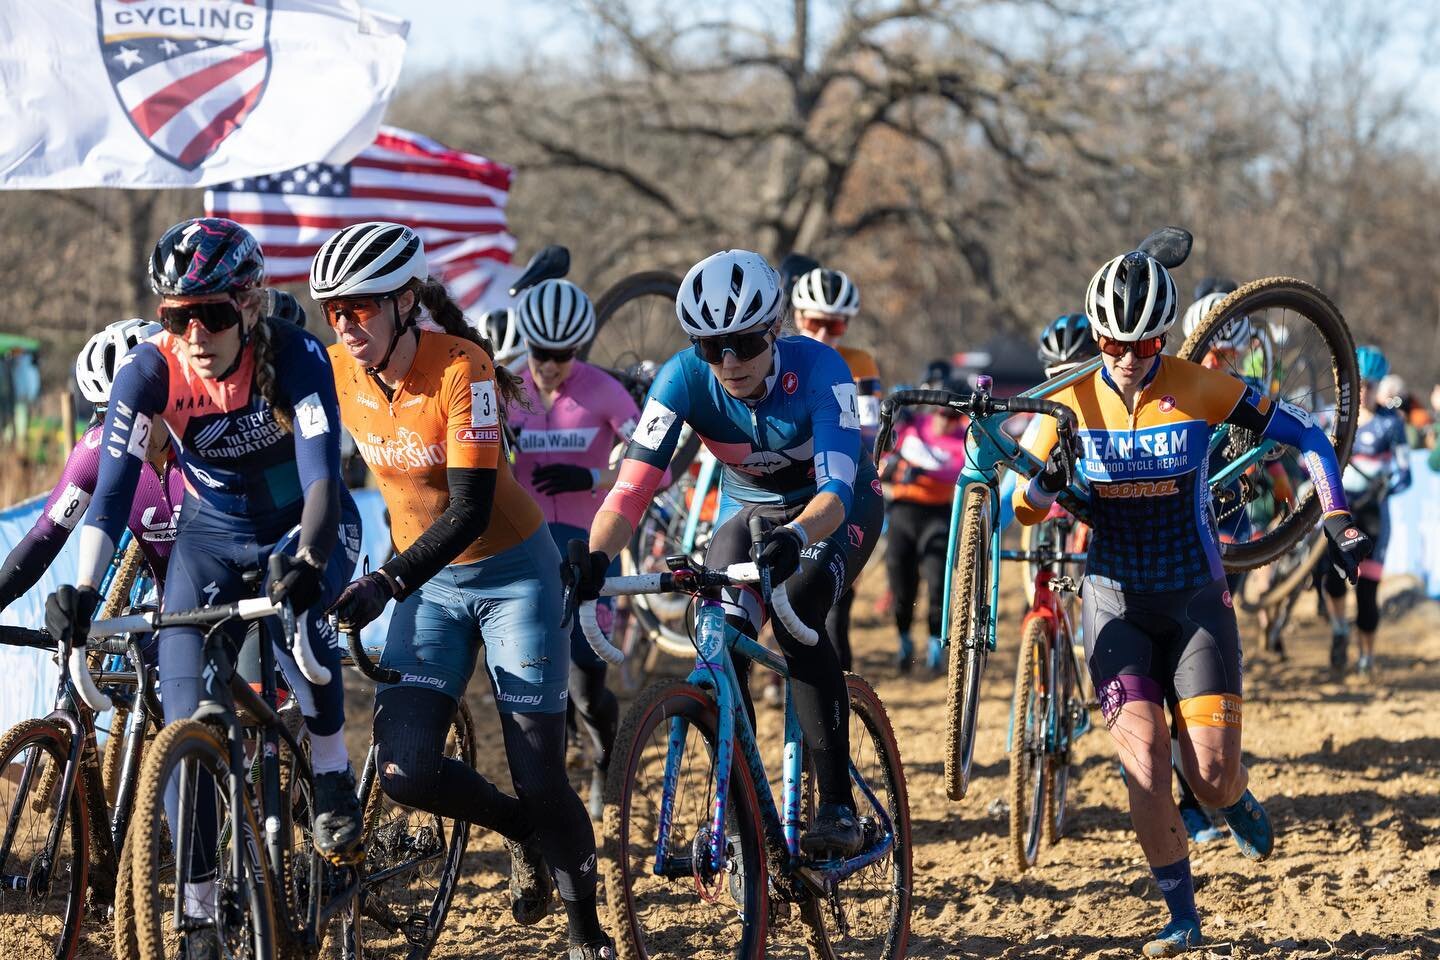 It&rsquo;s #tbt and also t-9 days to 2022 US Cyclocross Nationals in Hartford. To celebrate, we&rsquo;re sharing this lovely @snowymountainphotography gallery from &lsquo;21 Nationals outside Chicago, covering the 17-18 Junior women and our @madeline